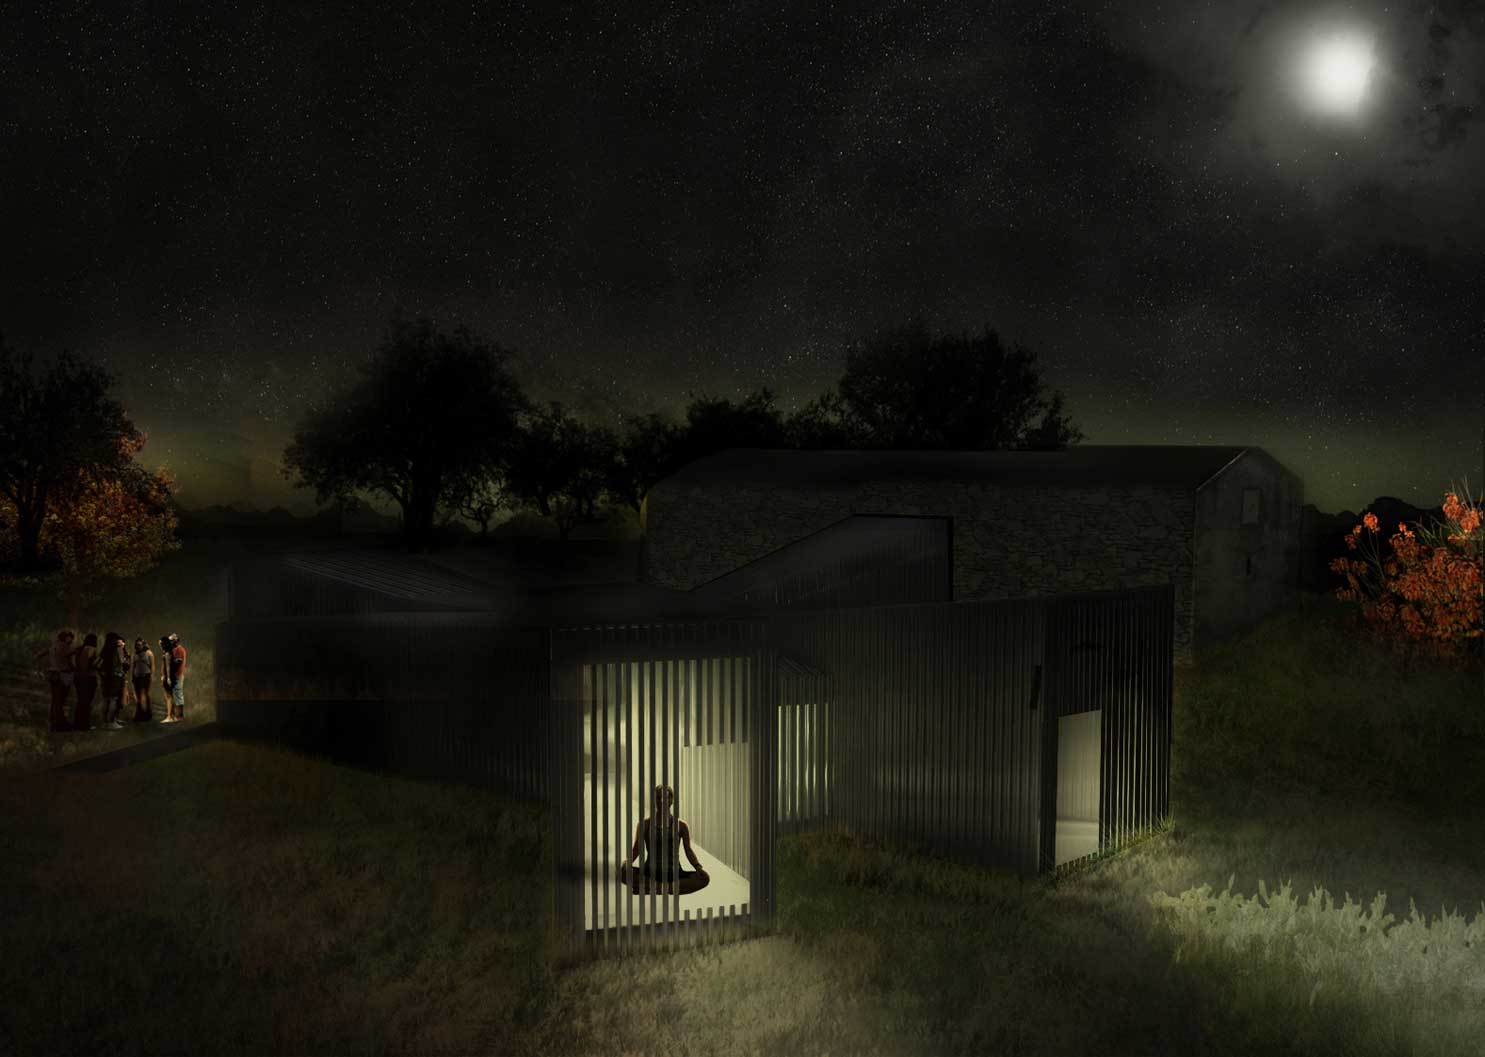 A computer generated image illustrating the Shelter for Pilgrims at night from an aerial view